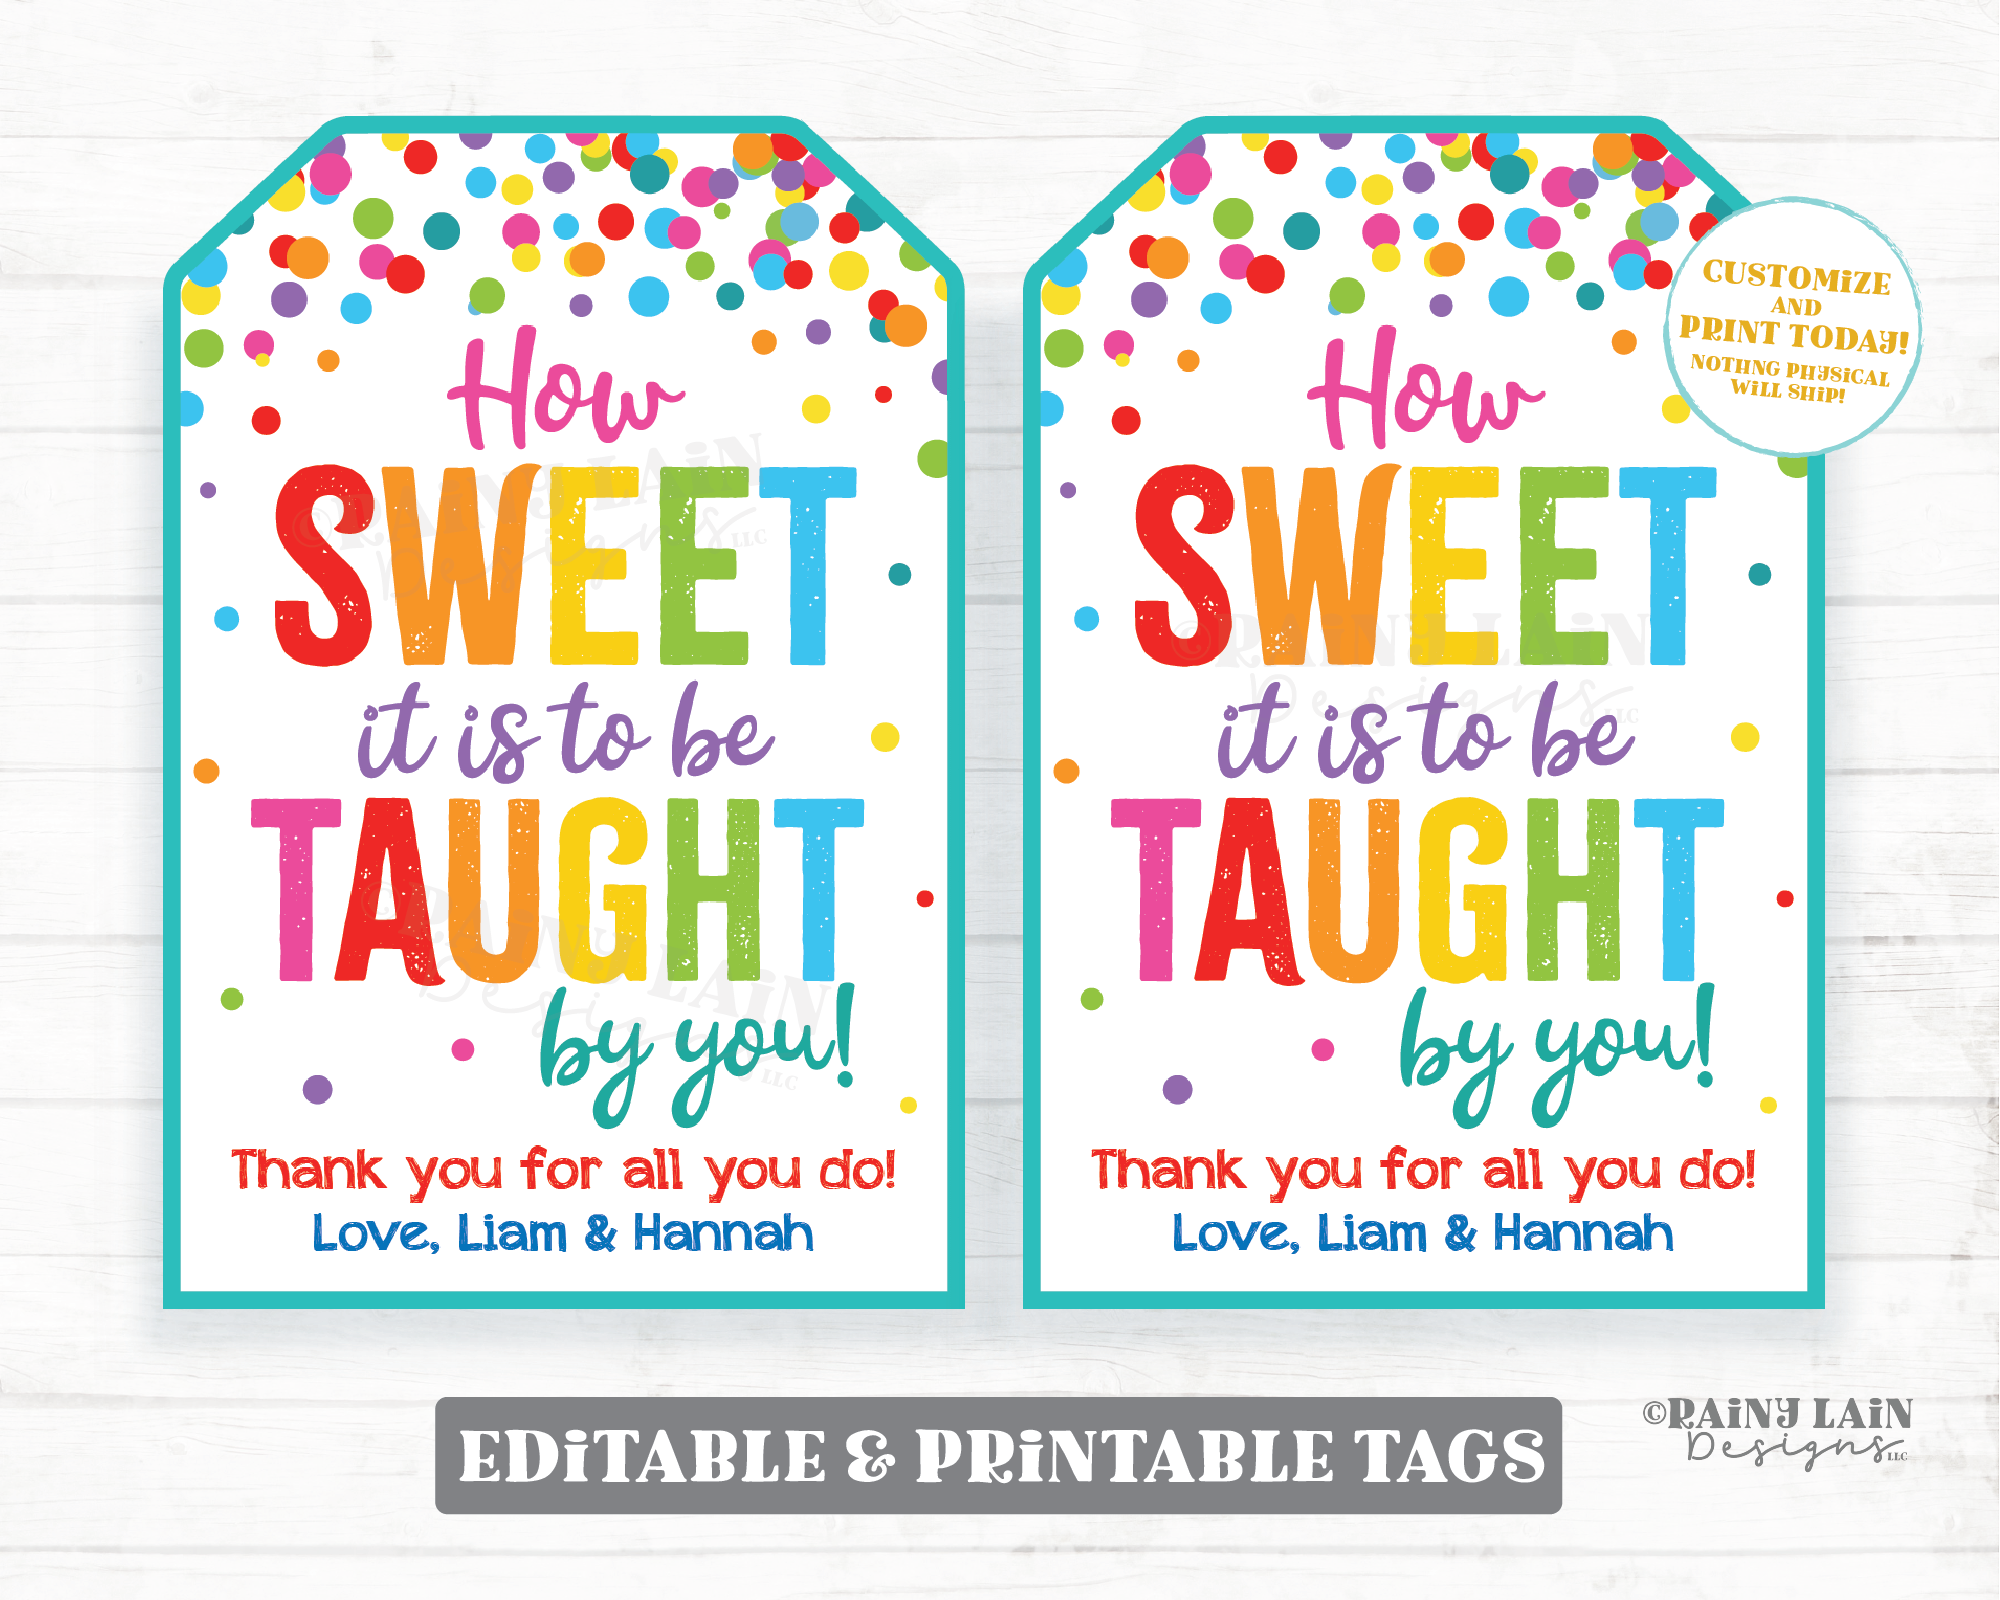 How sweet it is to be taught by you tag Teacher Appreciation Gift Tag Homemade Sweets Treats School PTO Thank you tag Printable Editable